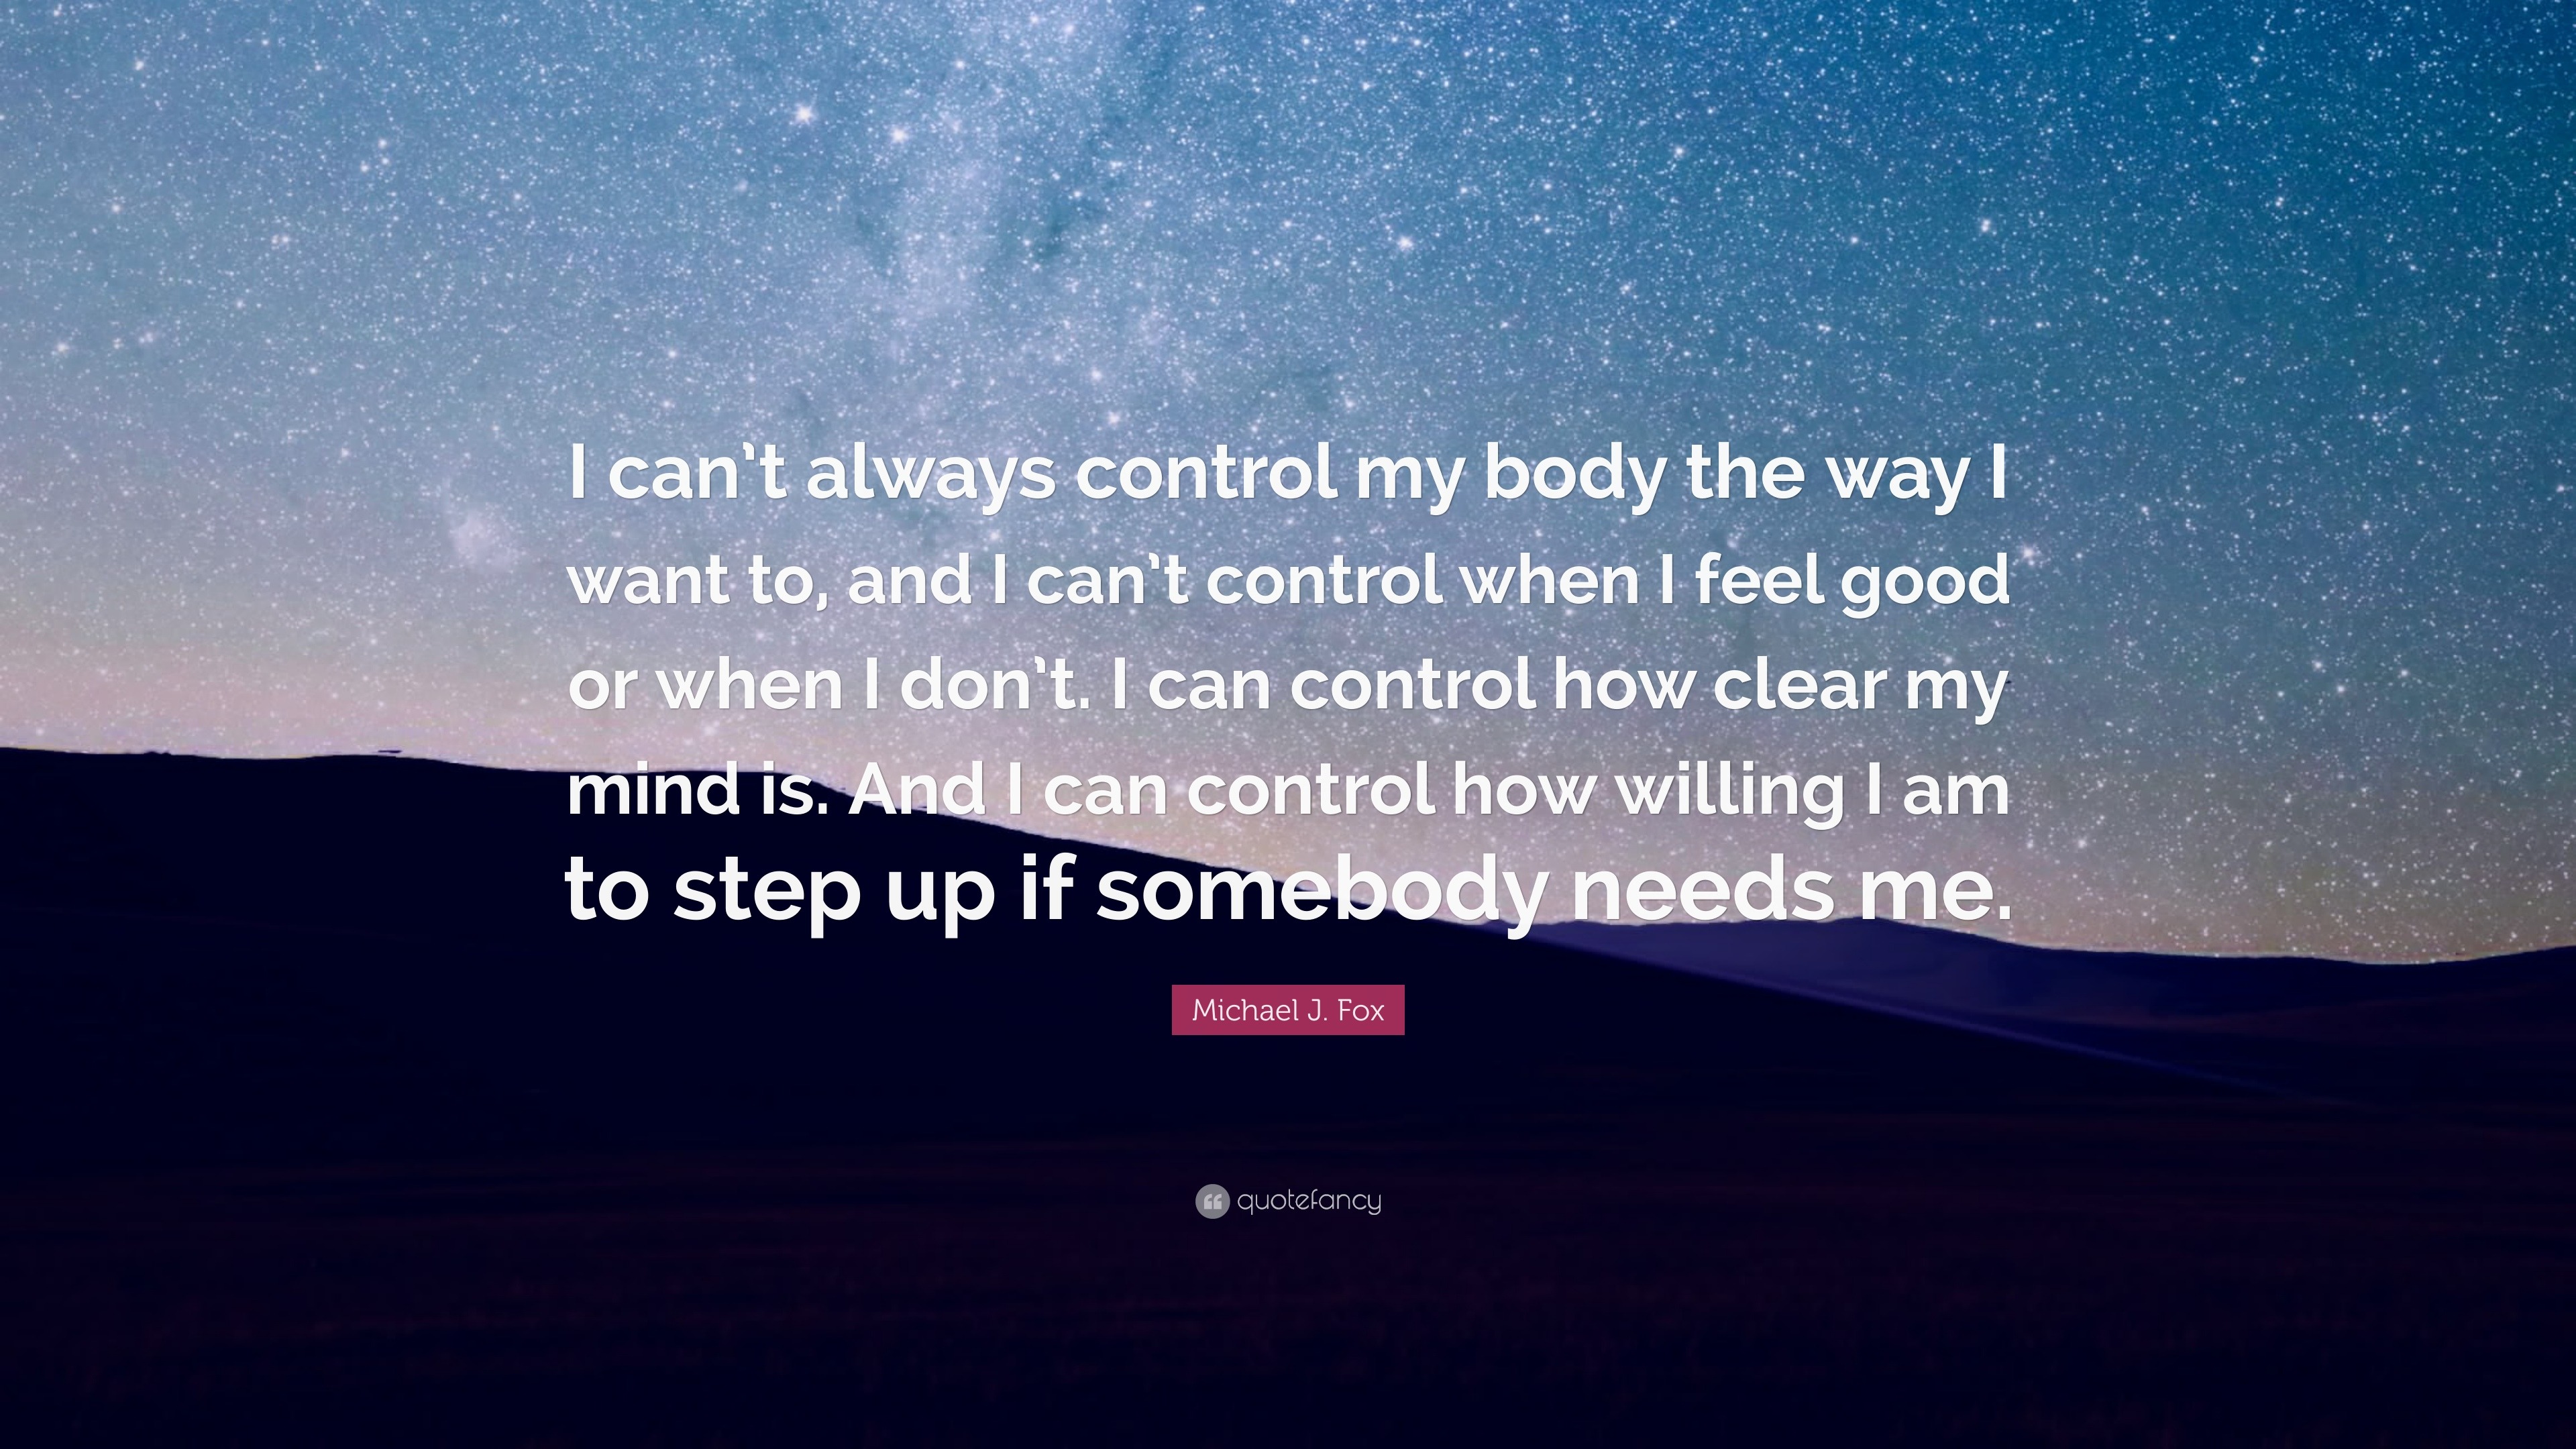 Michael J. Fox Quote: “I can’t always control my body the way I want to ...